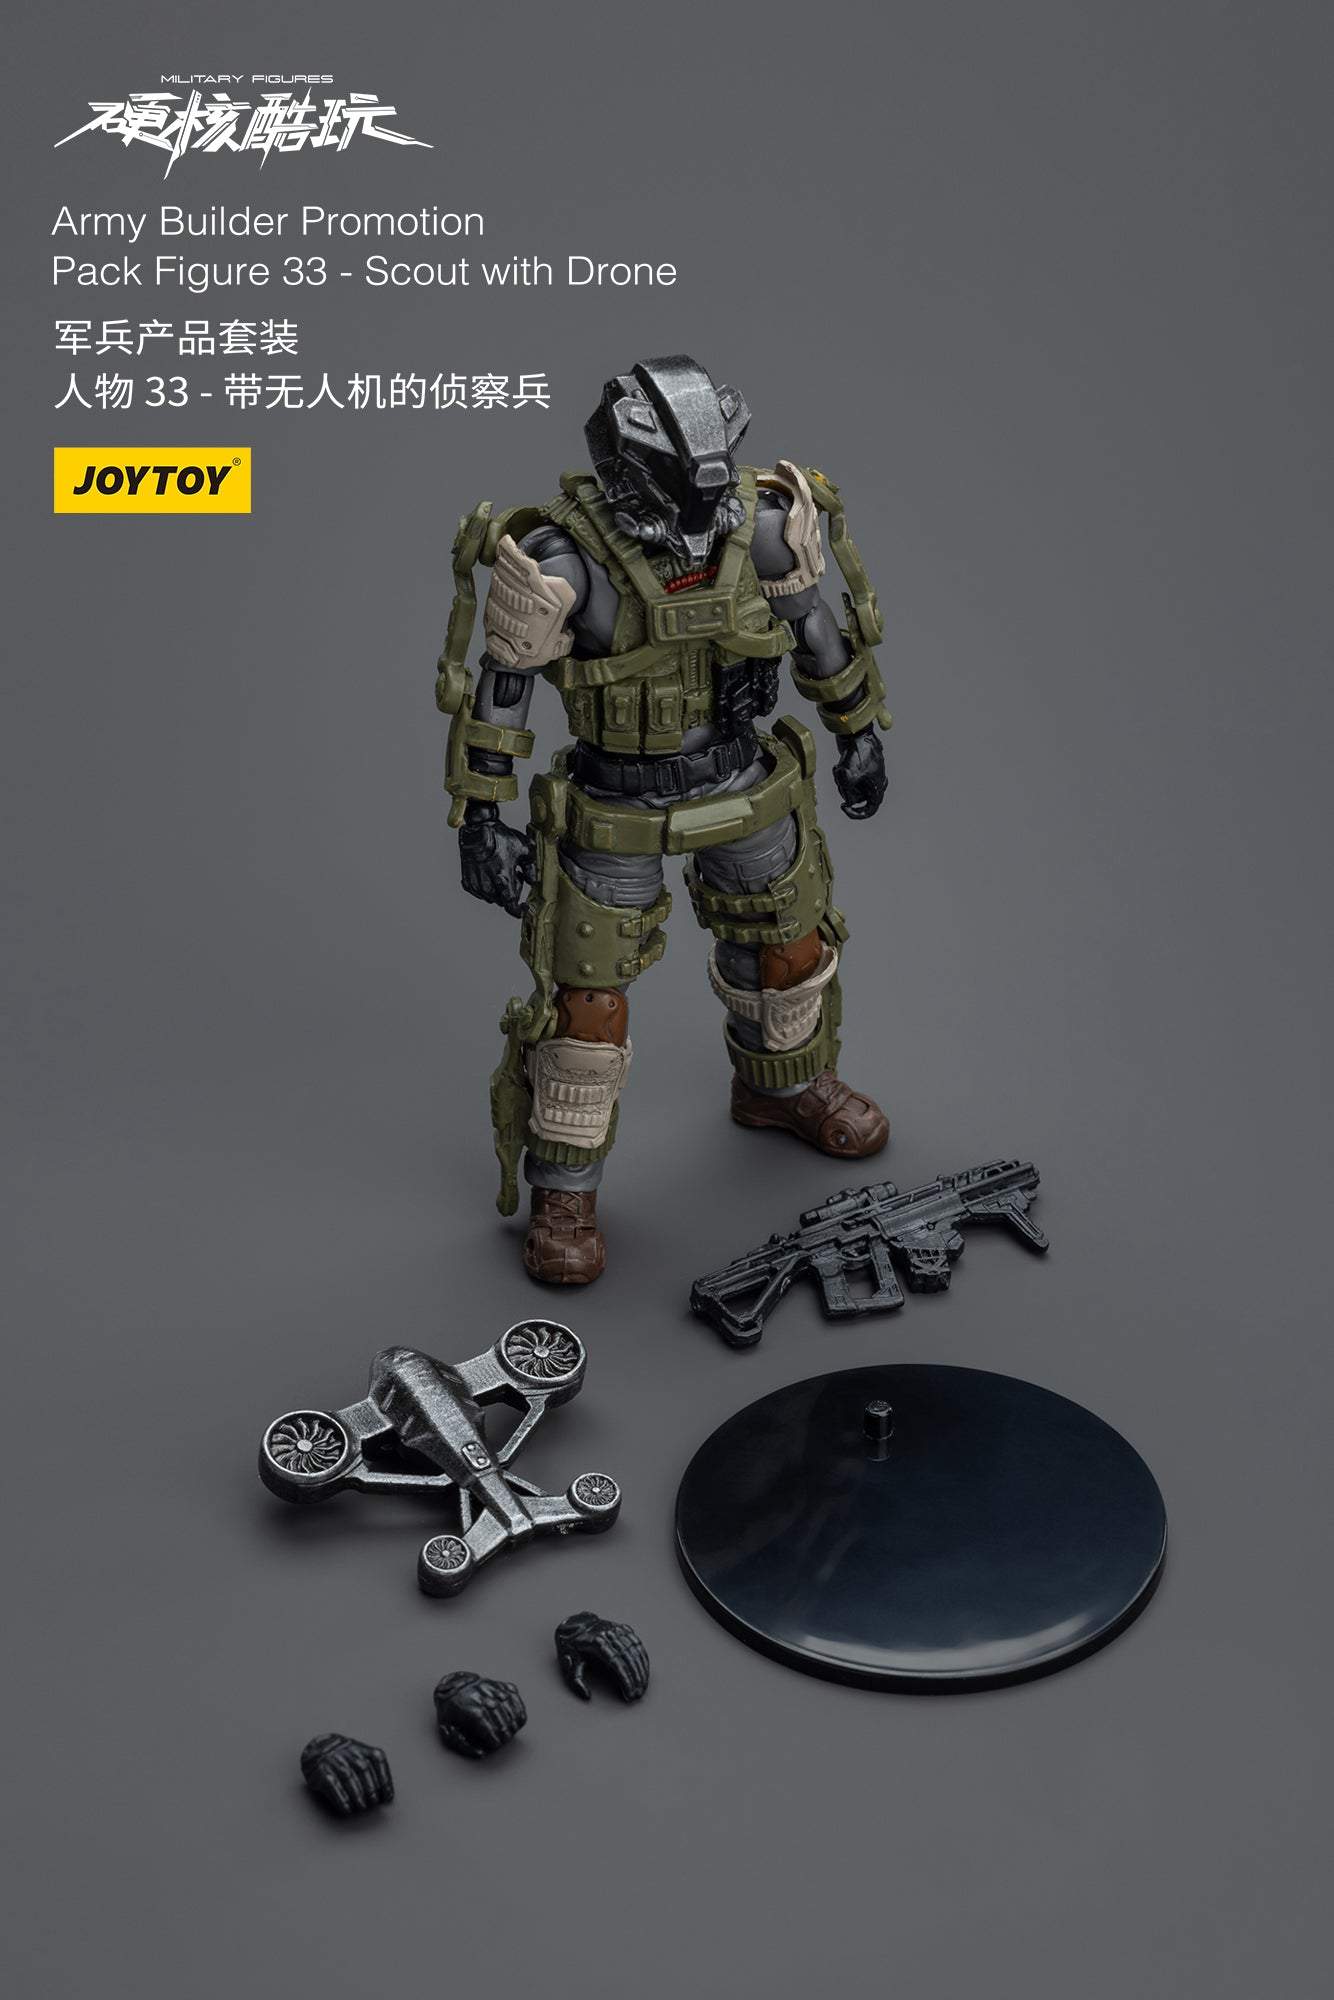 Army Builder Promotion Pack Figure 33 - Scout with Drone - Soldiers Action Figure By JOYTOY